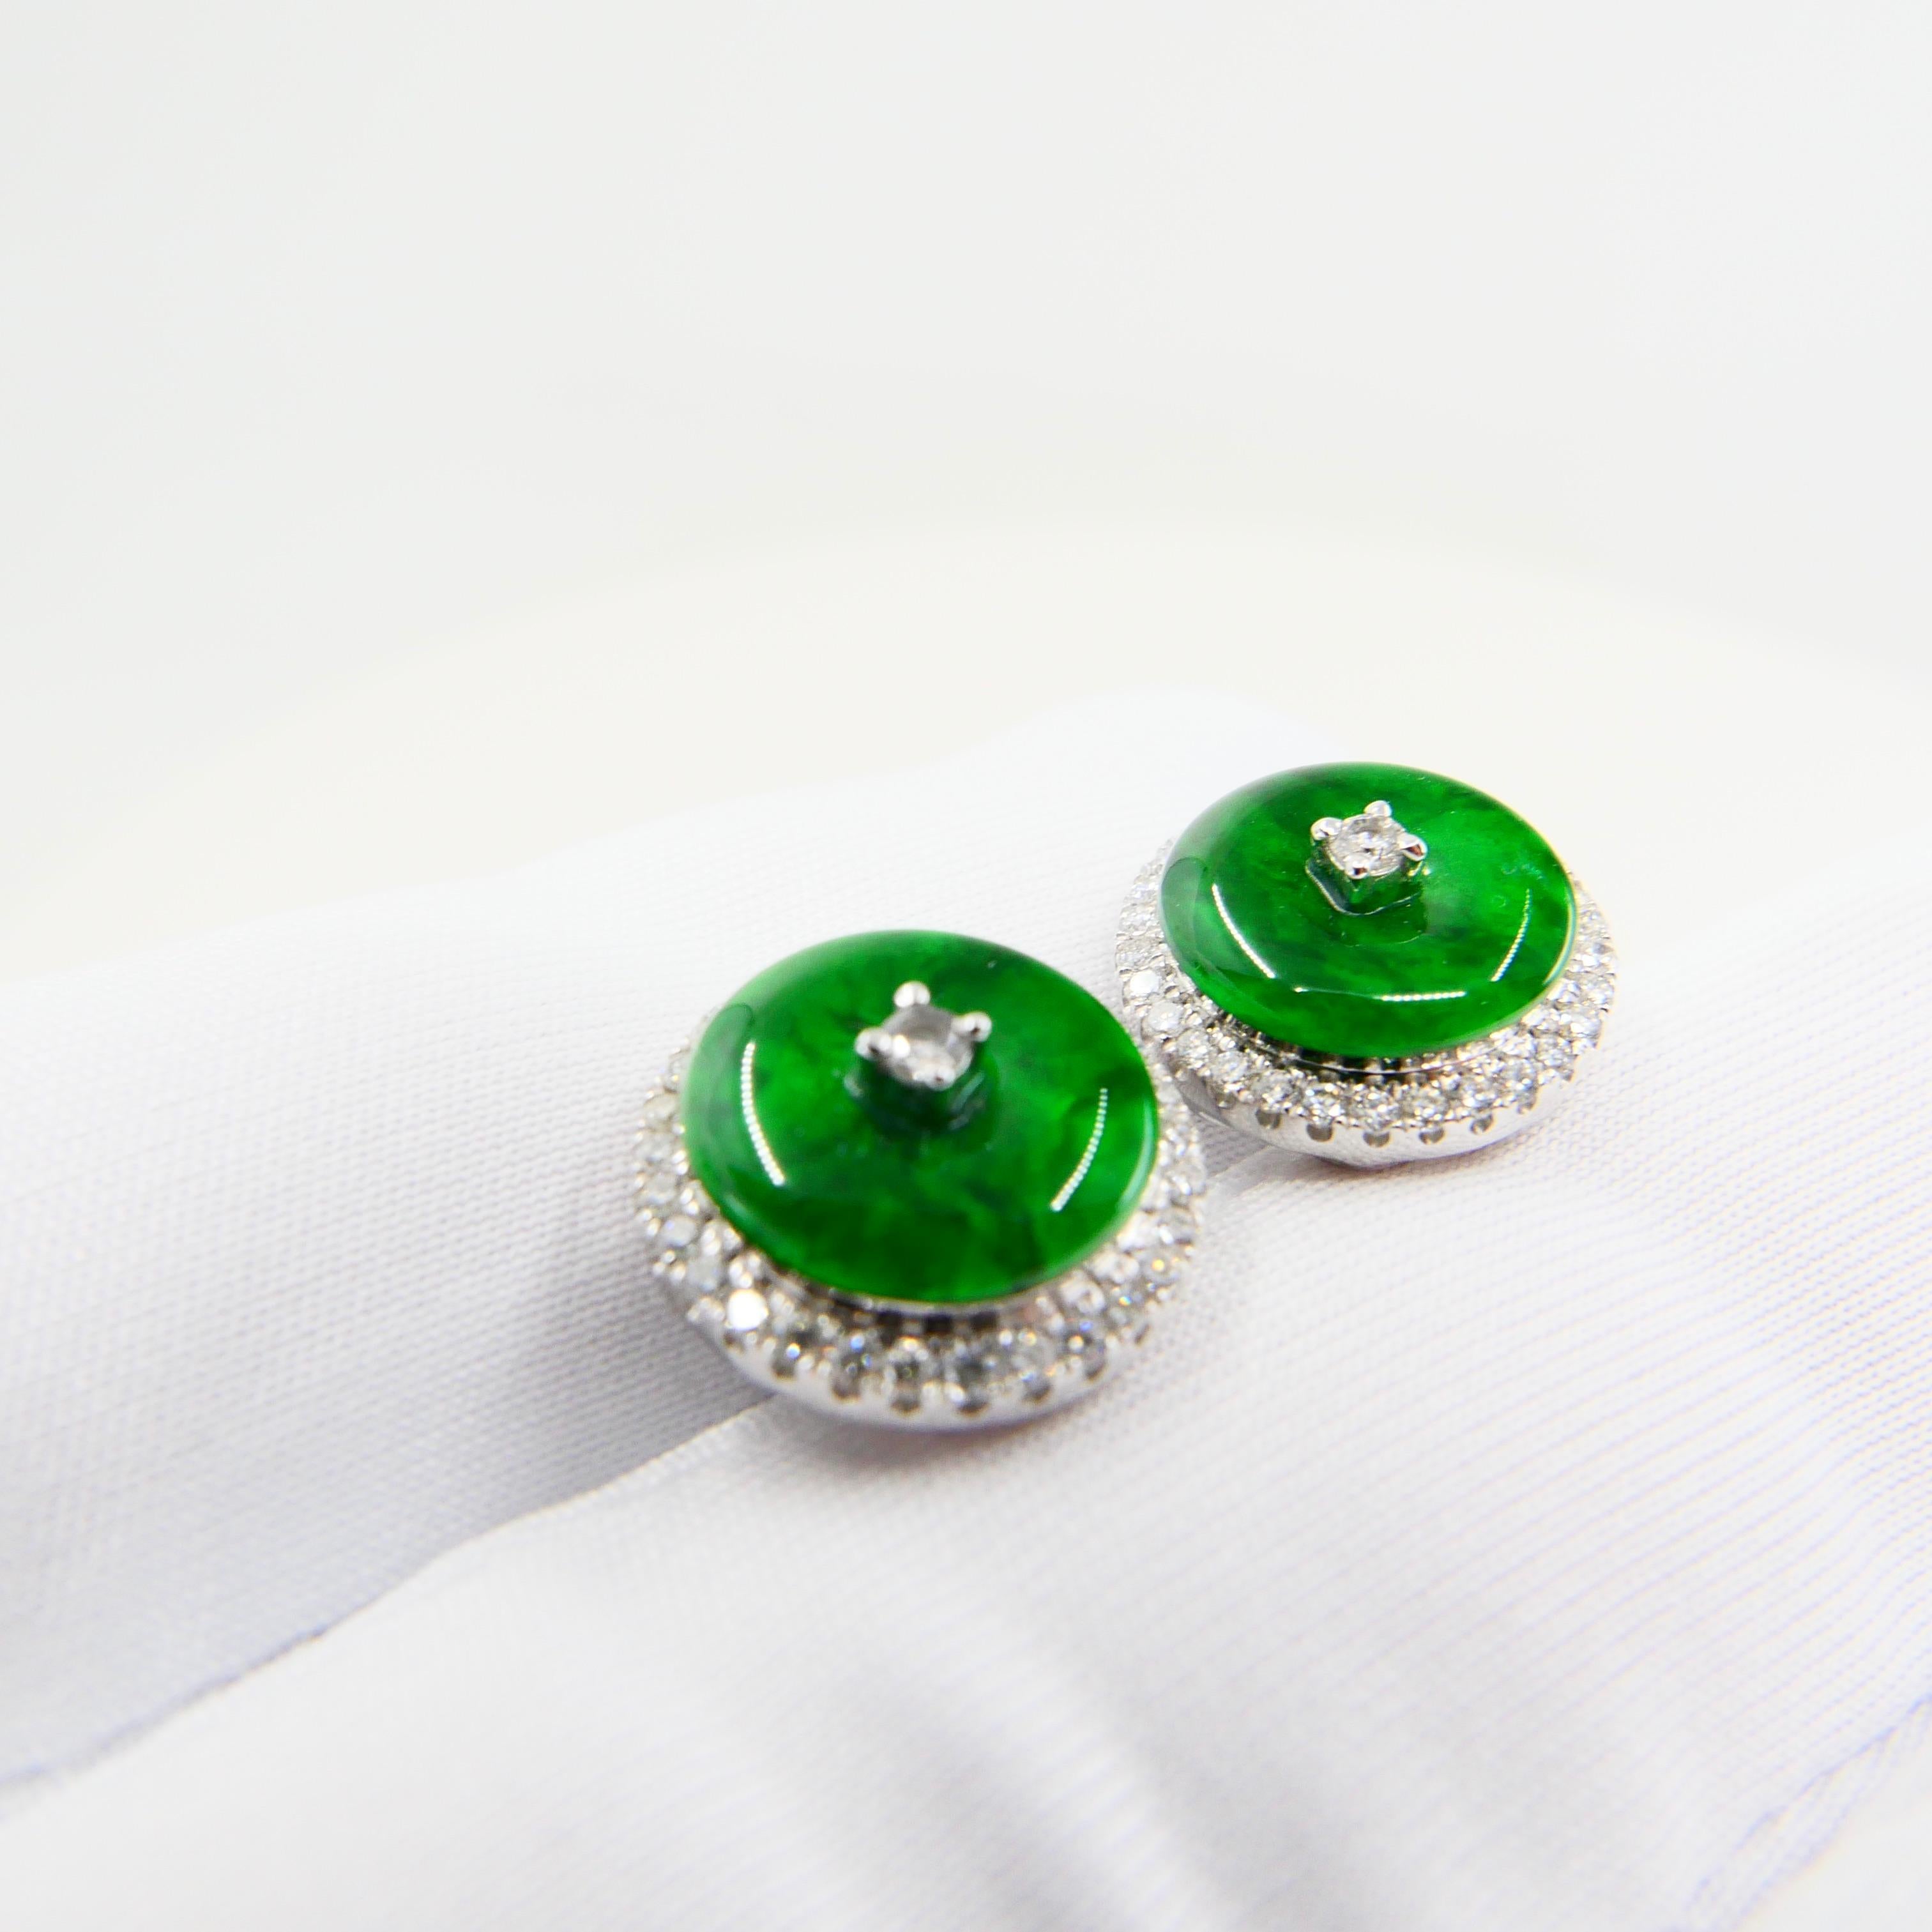 Certified Natural Type A Jadeite Jade and Diamond Earrings, Spinach Green Color 4